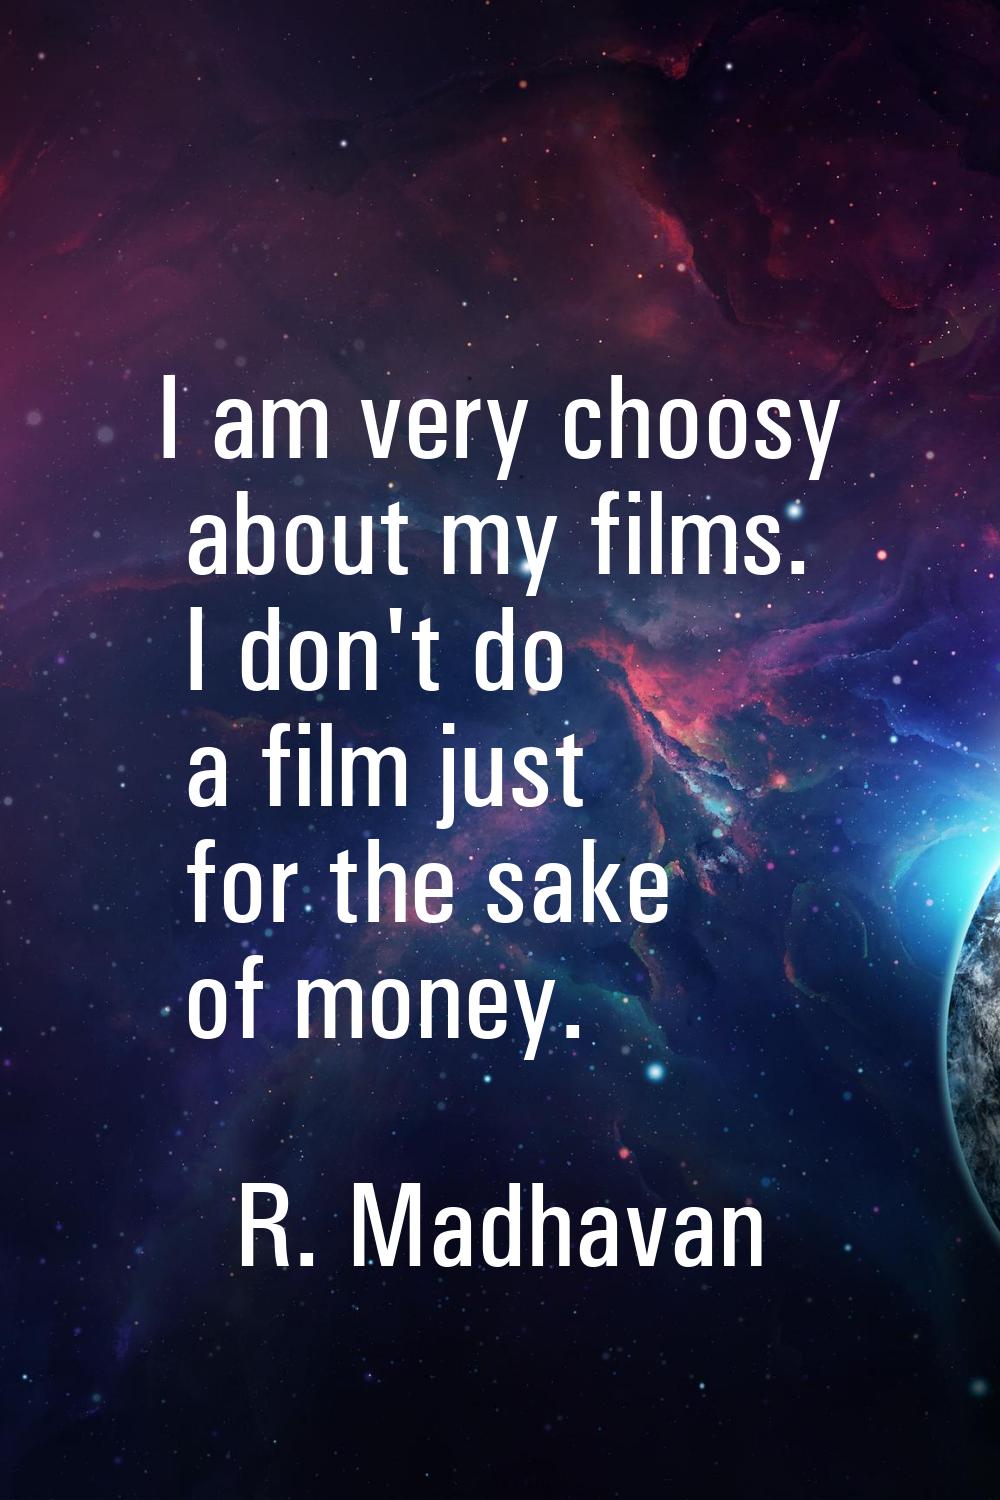 I am very choosy about my films. I don't do a film just for the sake of money.